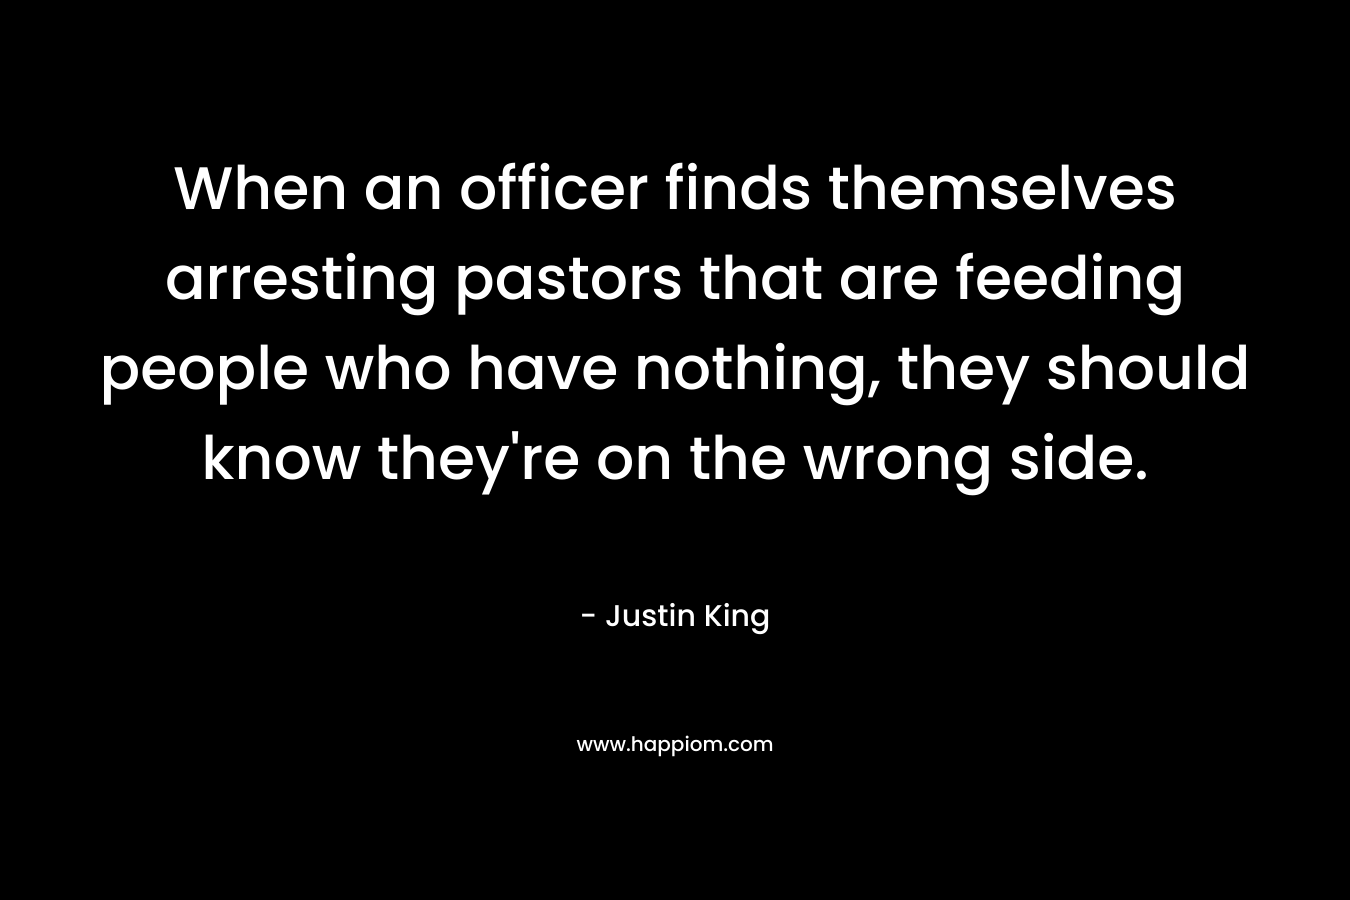 When an officer finds themselves arresting pastors that are feeding people who have nothing, they should know they’re on the wrong side. – Justin King